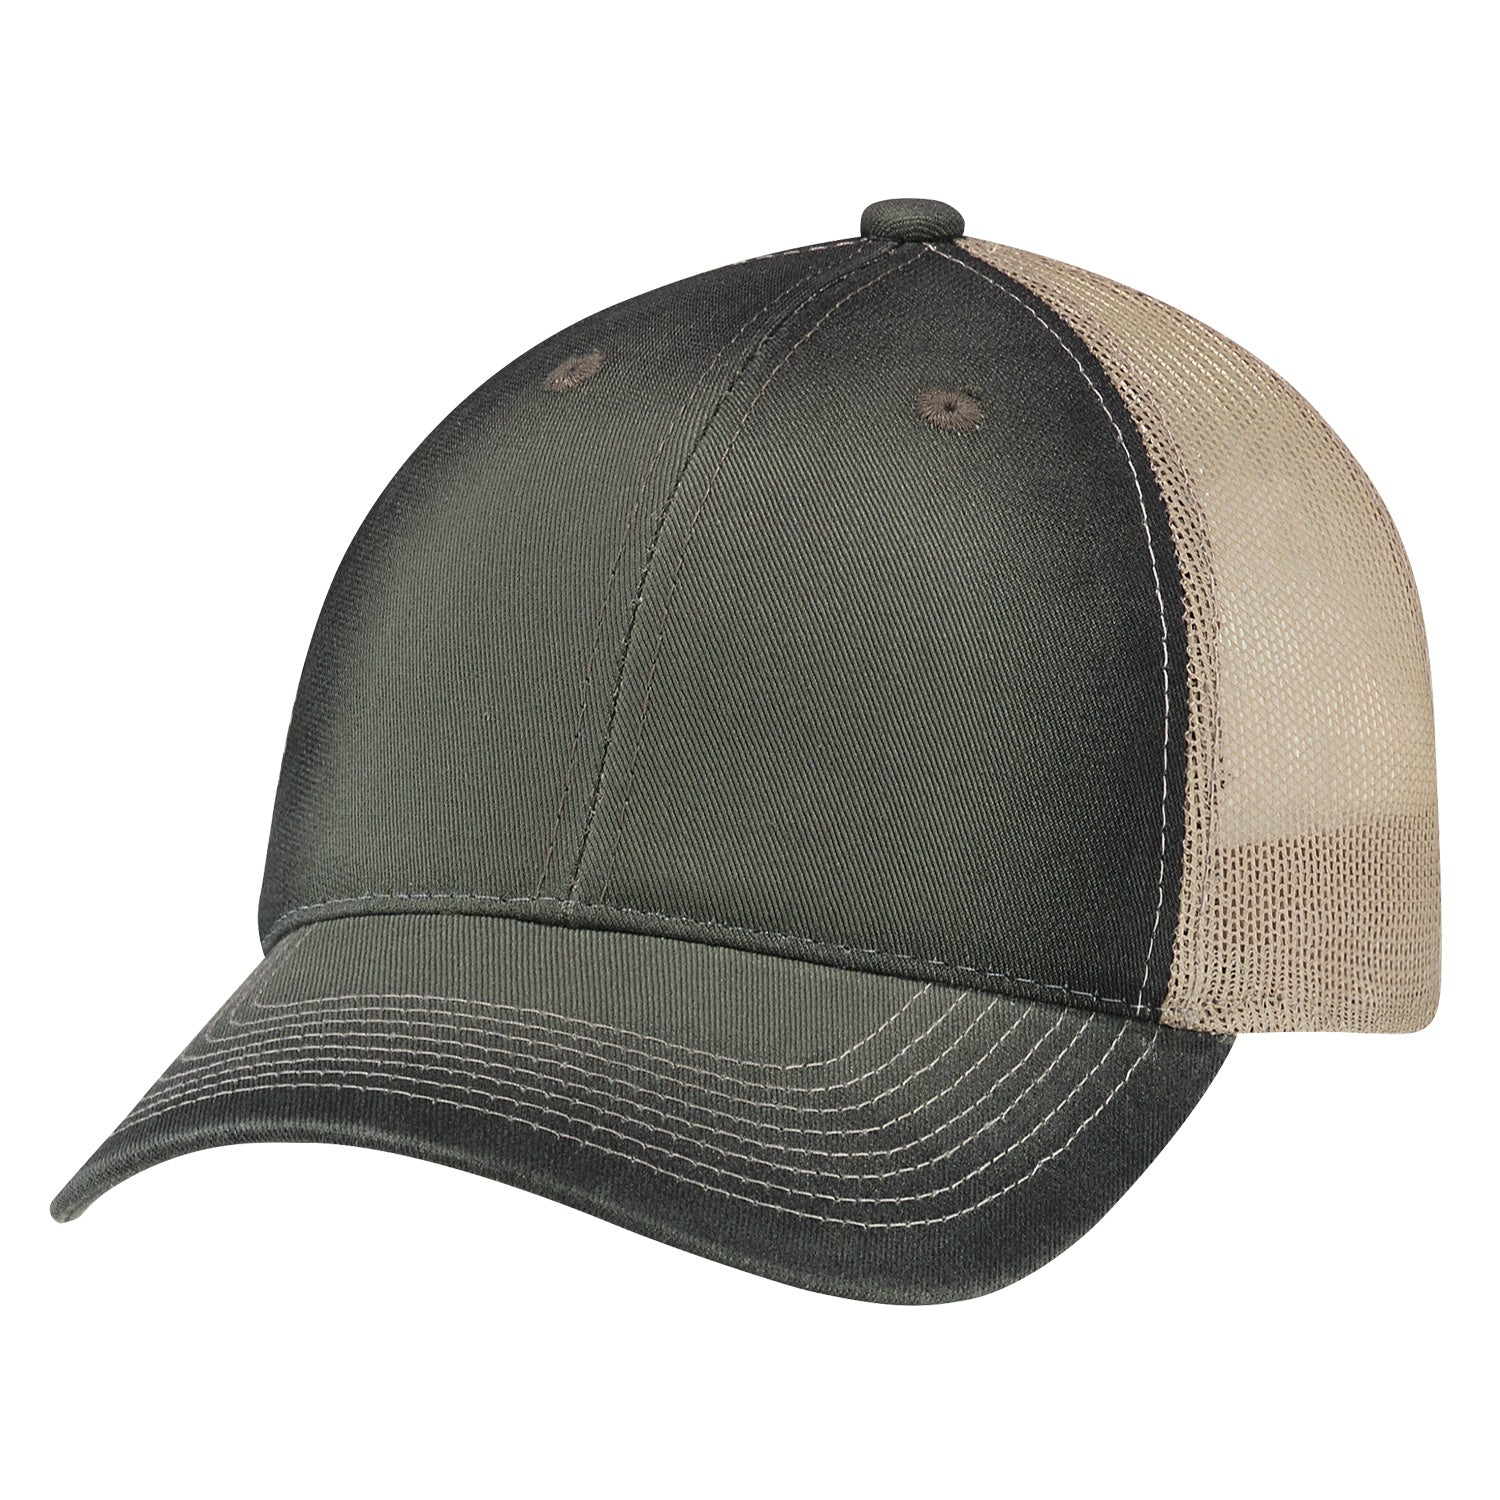 AJM Polyester Marl And Spandex Stretch Fit Cap Black – More Than Just Caps  Clubhouse